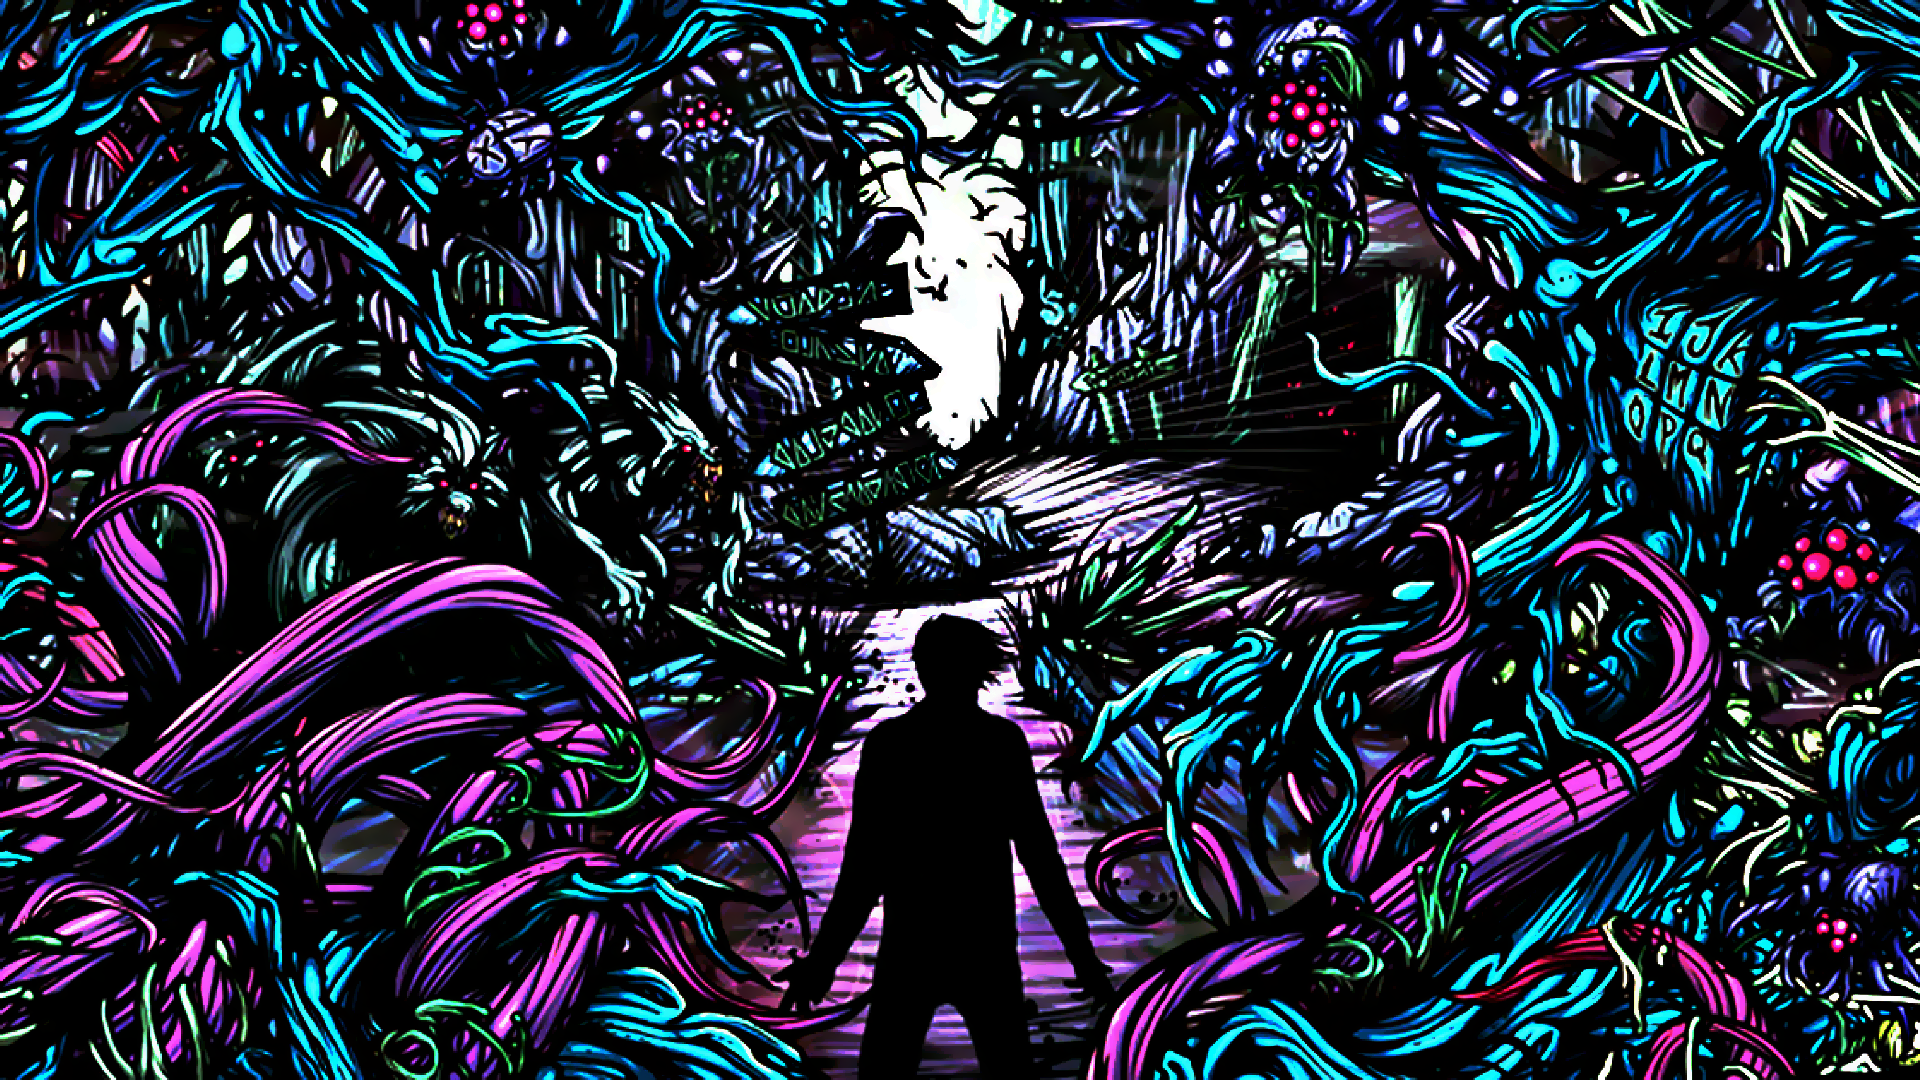 75+] A Day To Remember Wallpapers - WallpaperSafari